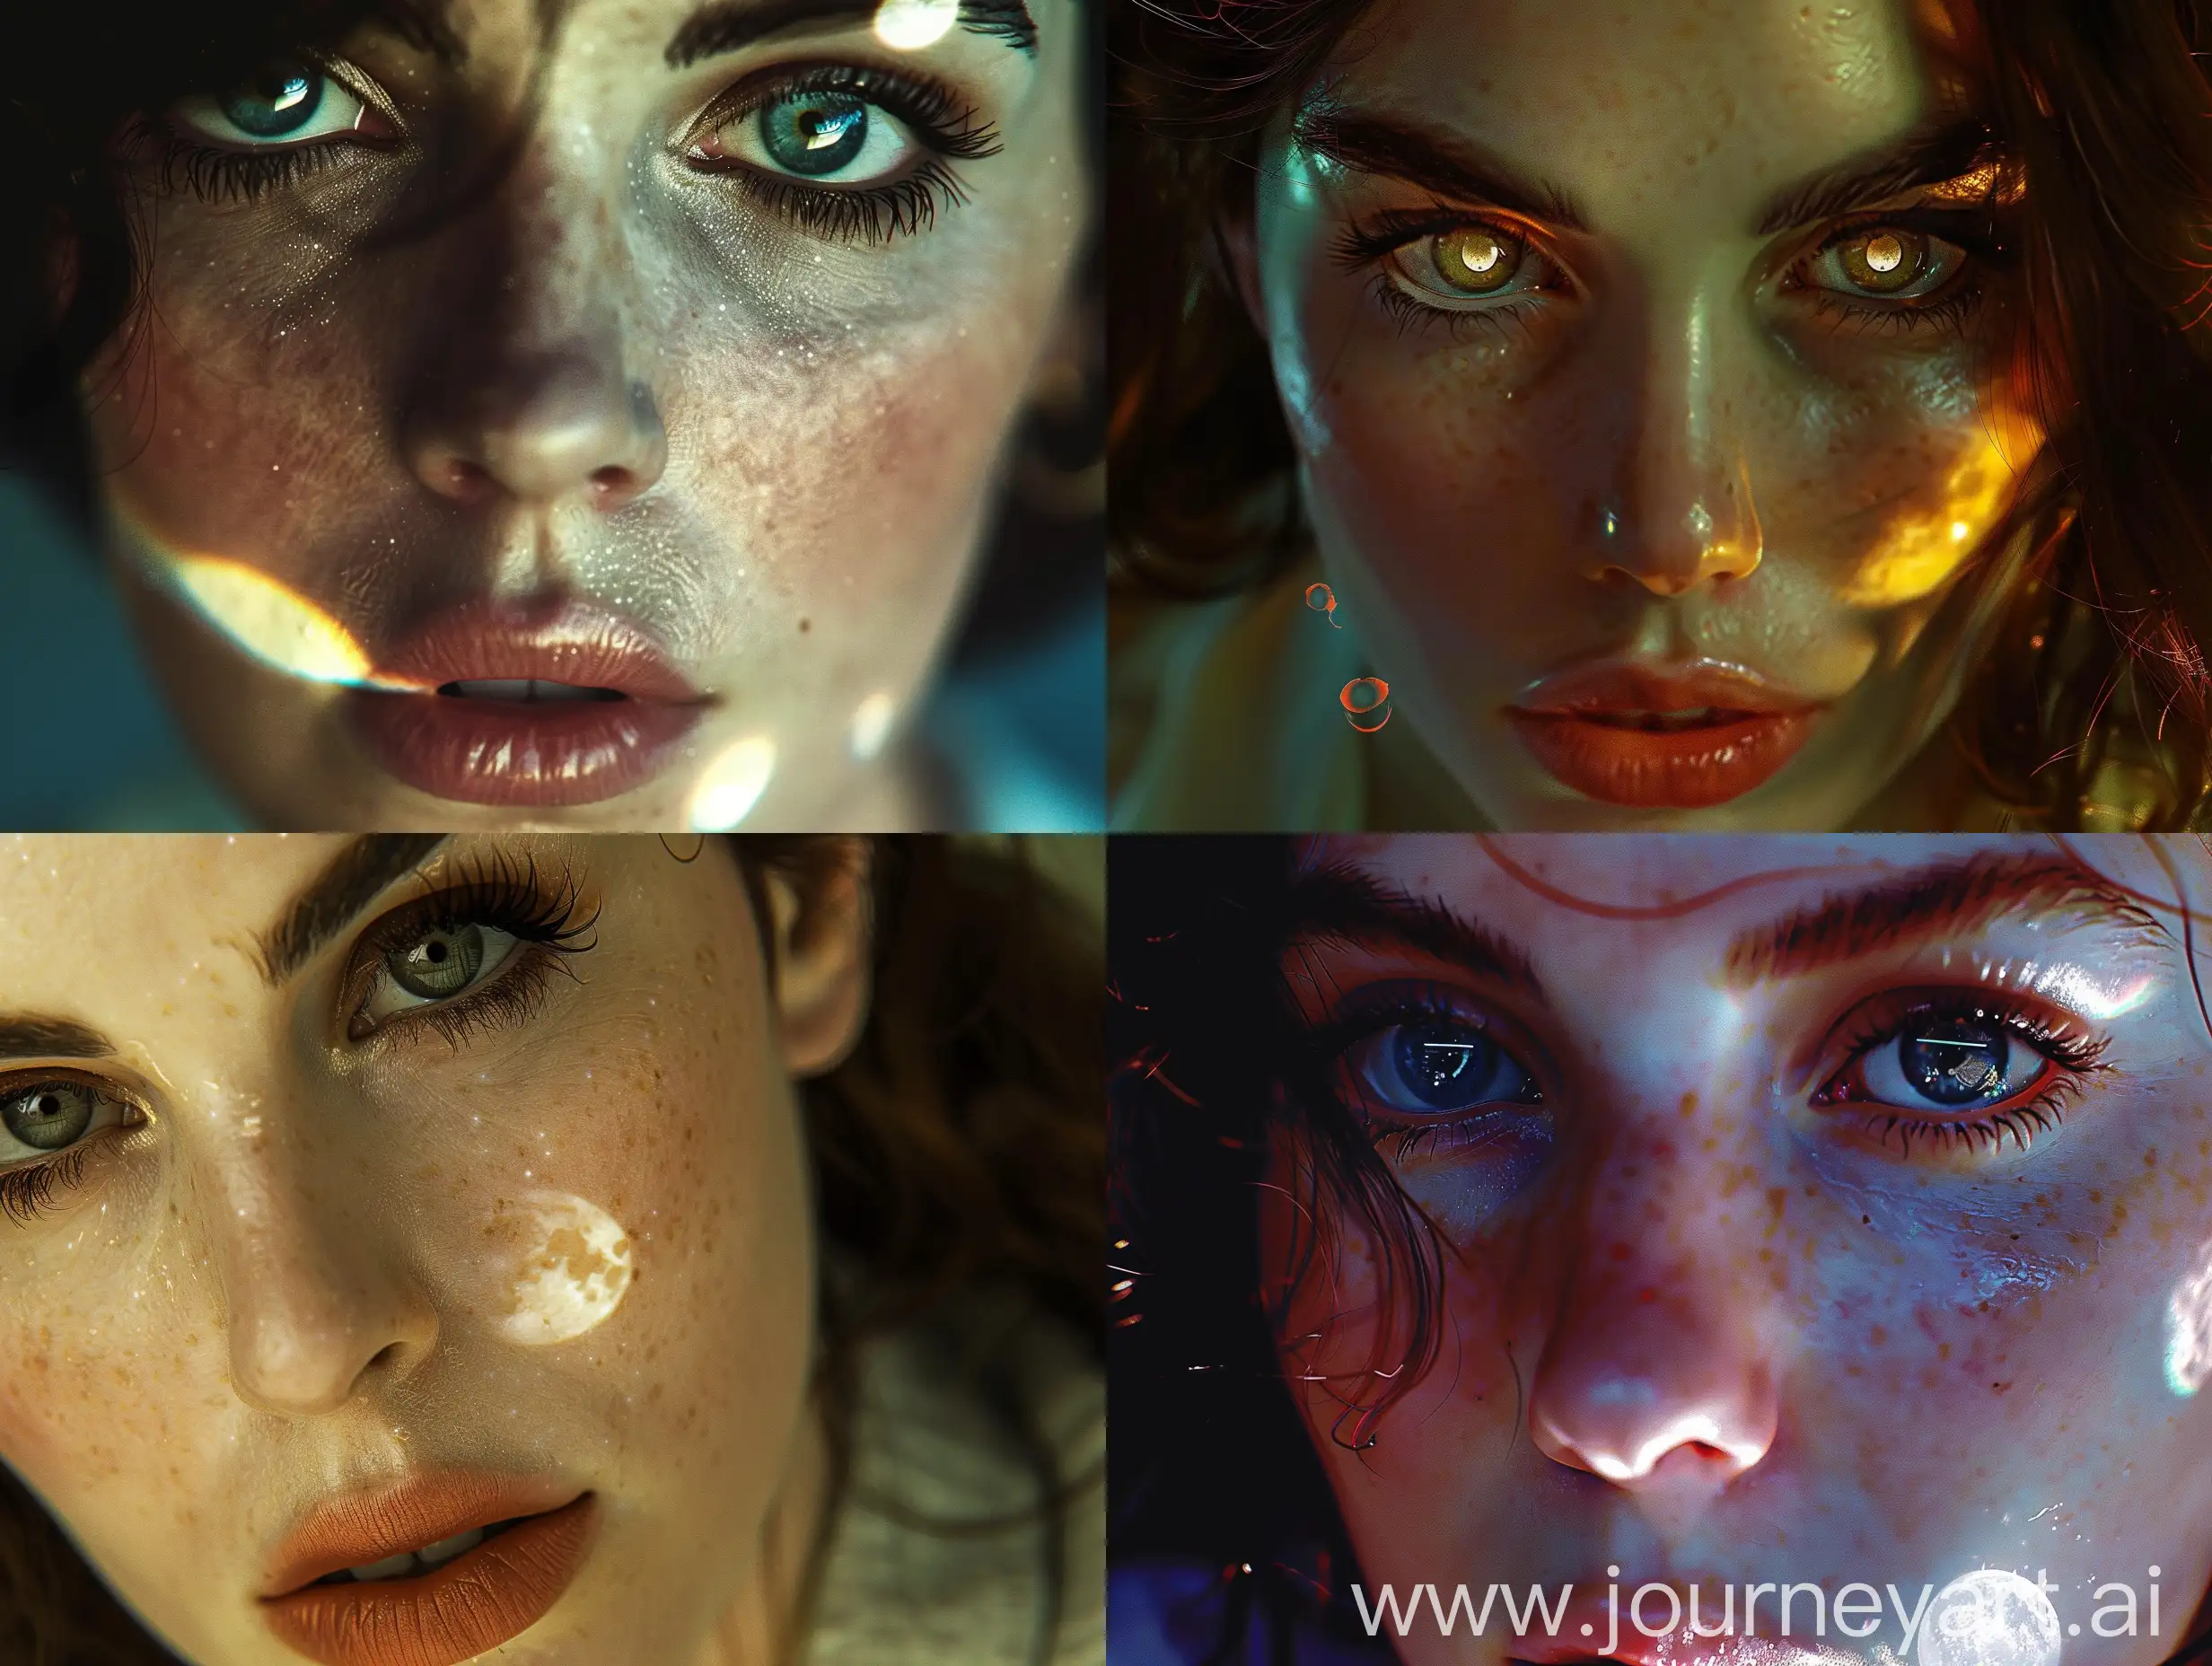 Lana del Rey ultra close up portrait with magic moon reflecting in eyes, cinematic lighting, highly detailed